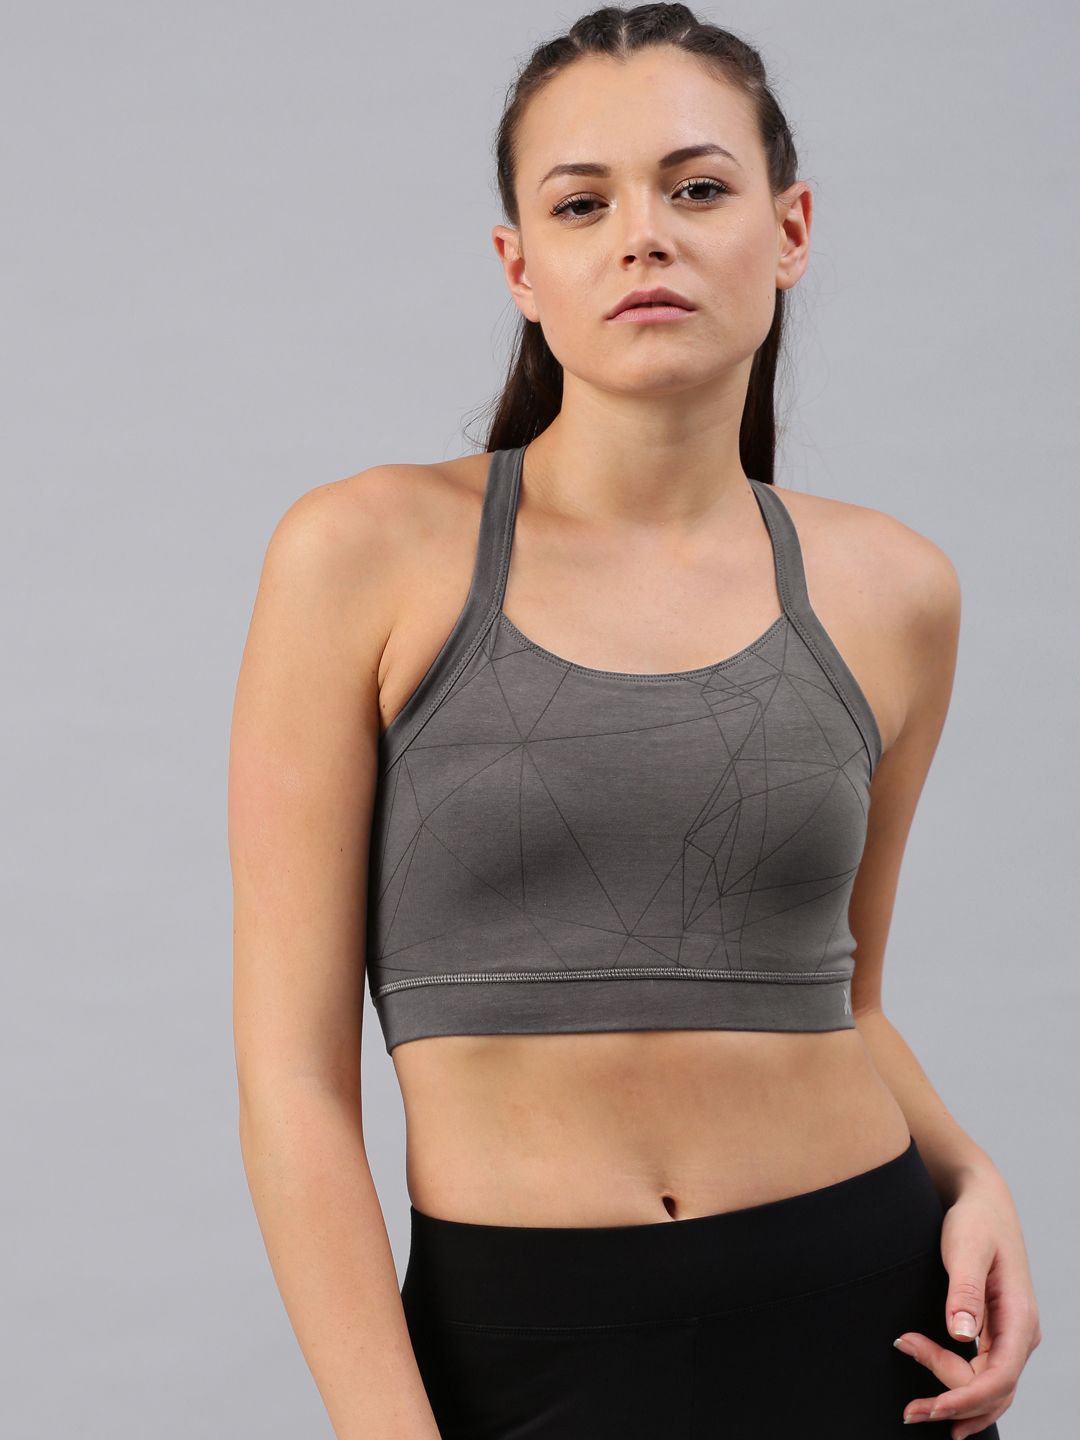 HRX by Hrithik Roshan Grey Printed Non-Wired Lightly Padded Sports Bra Price in India